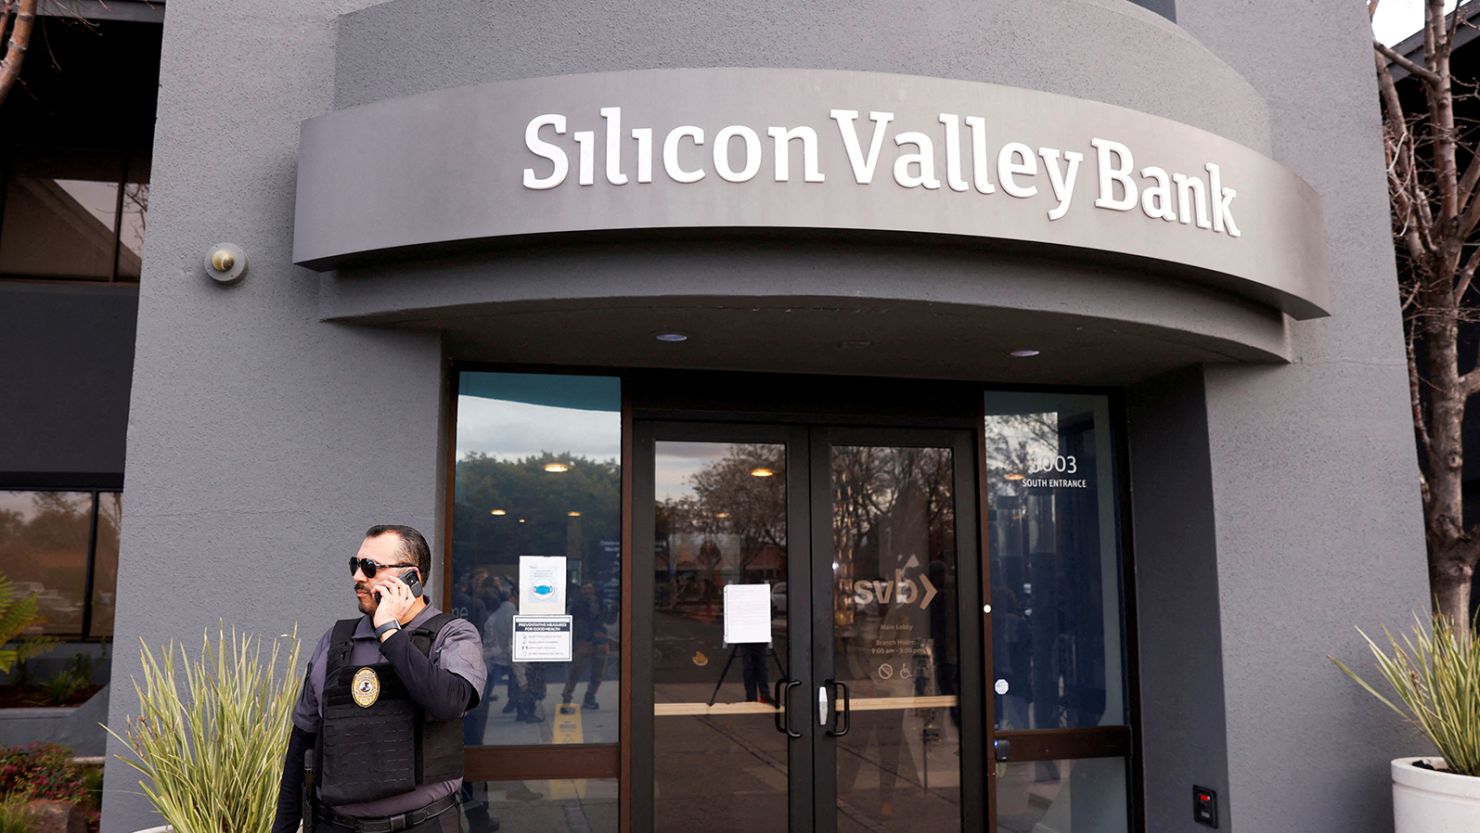 The collapse of Silicon Valley Bank was the second-biggest bank failure in US history.